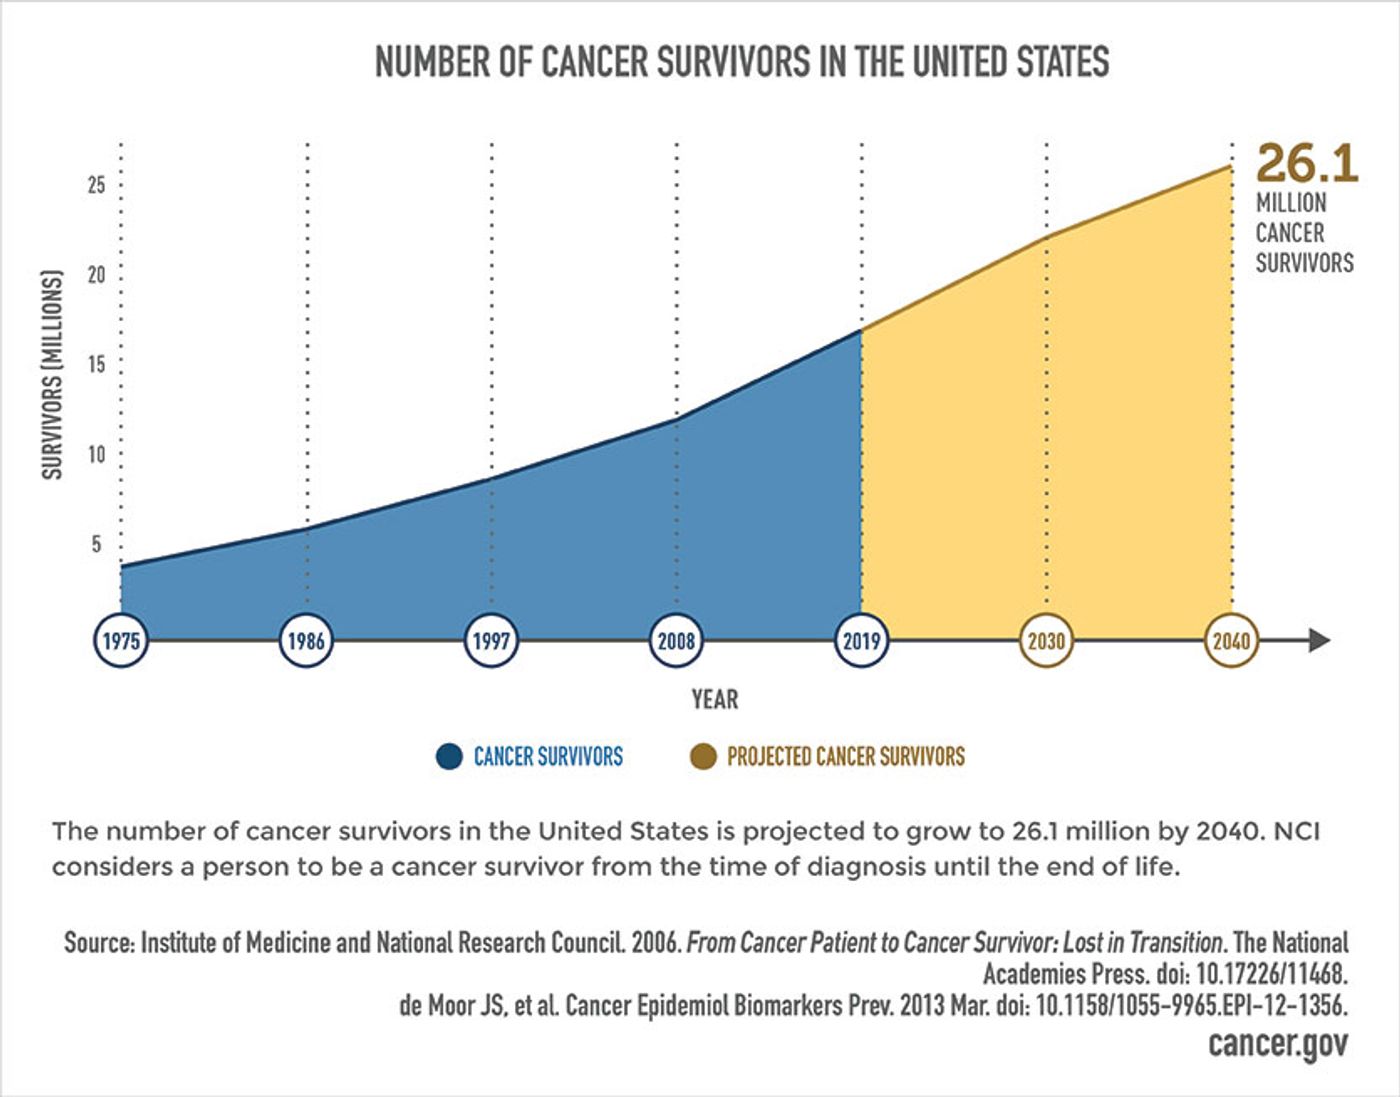 Source: National Cancer Institute